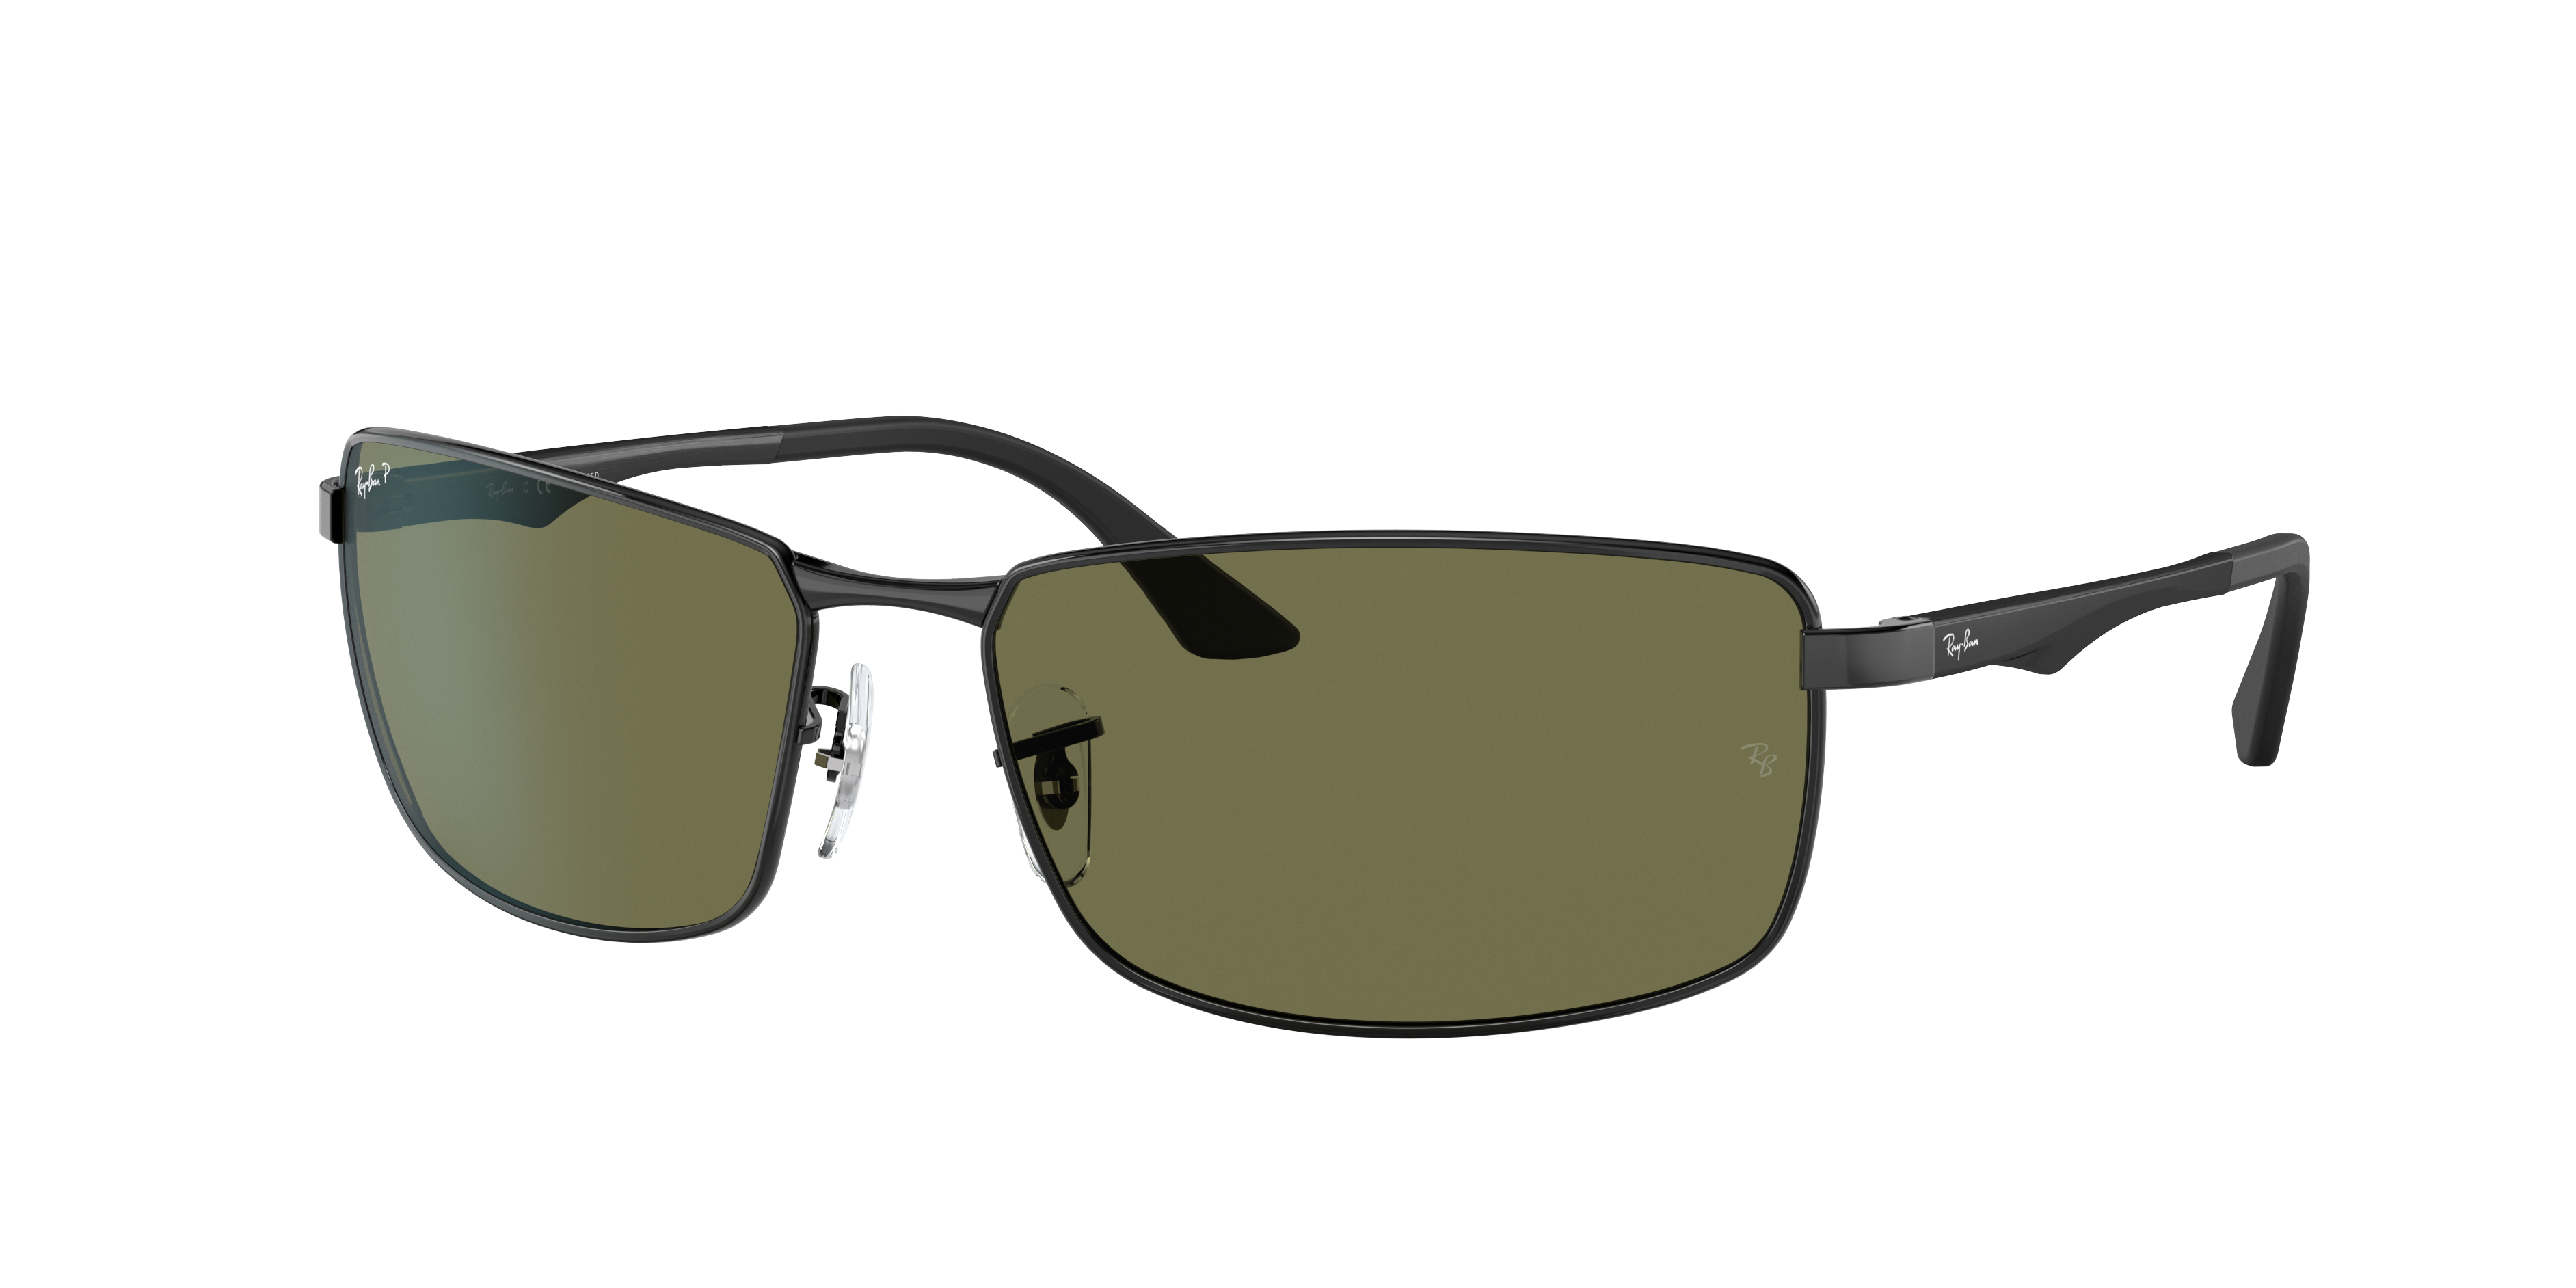 Rb3498 Sunglasses in Black and Green | Ray-Ban®